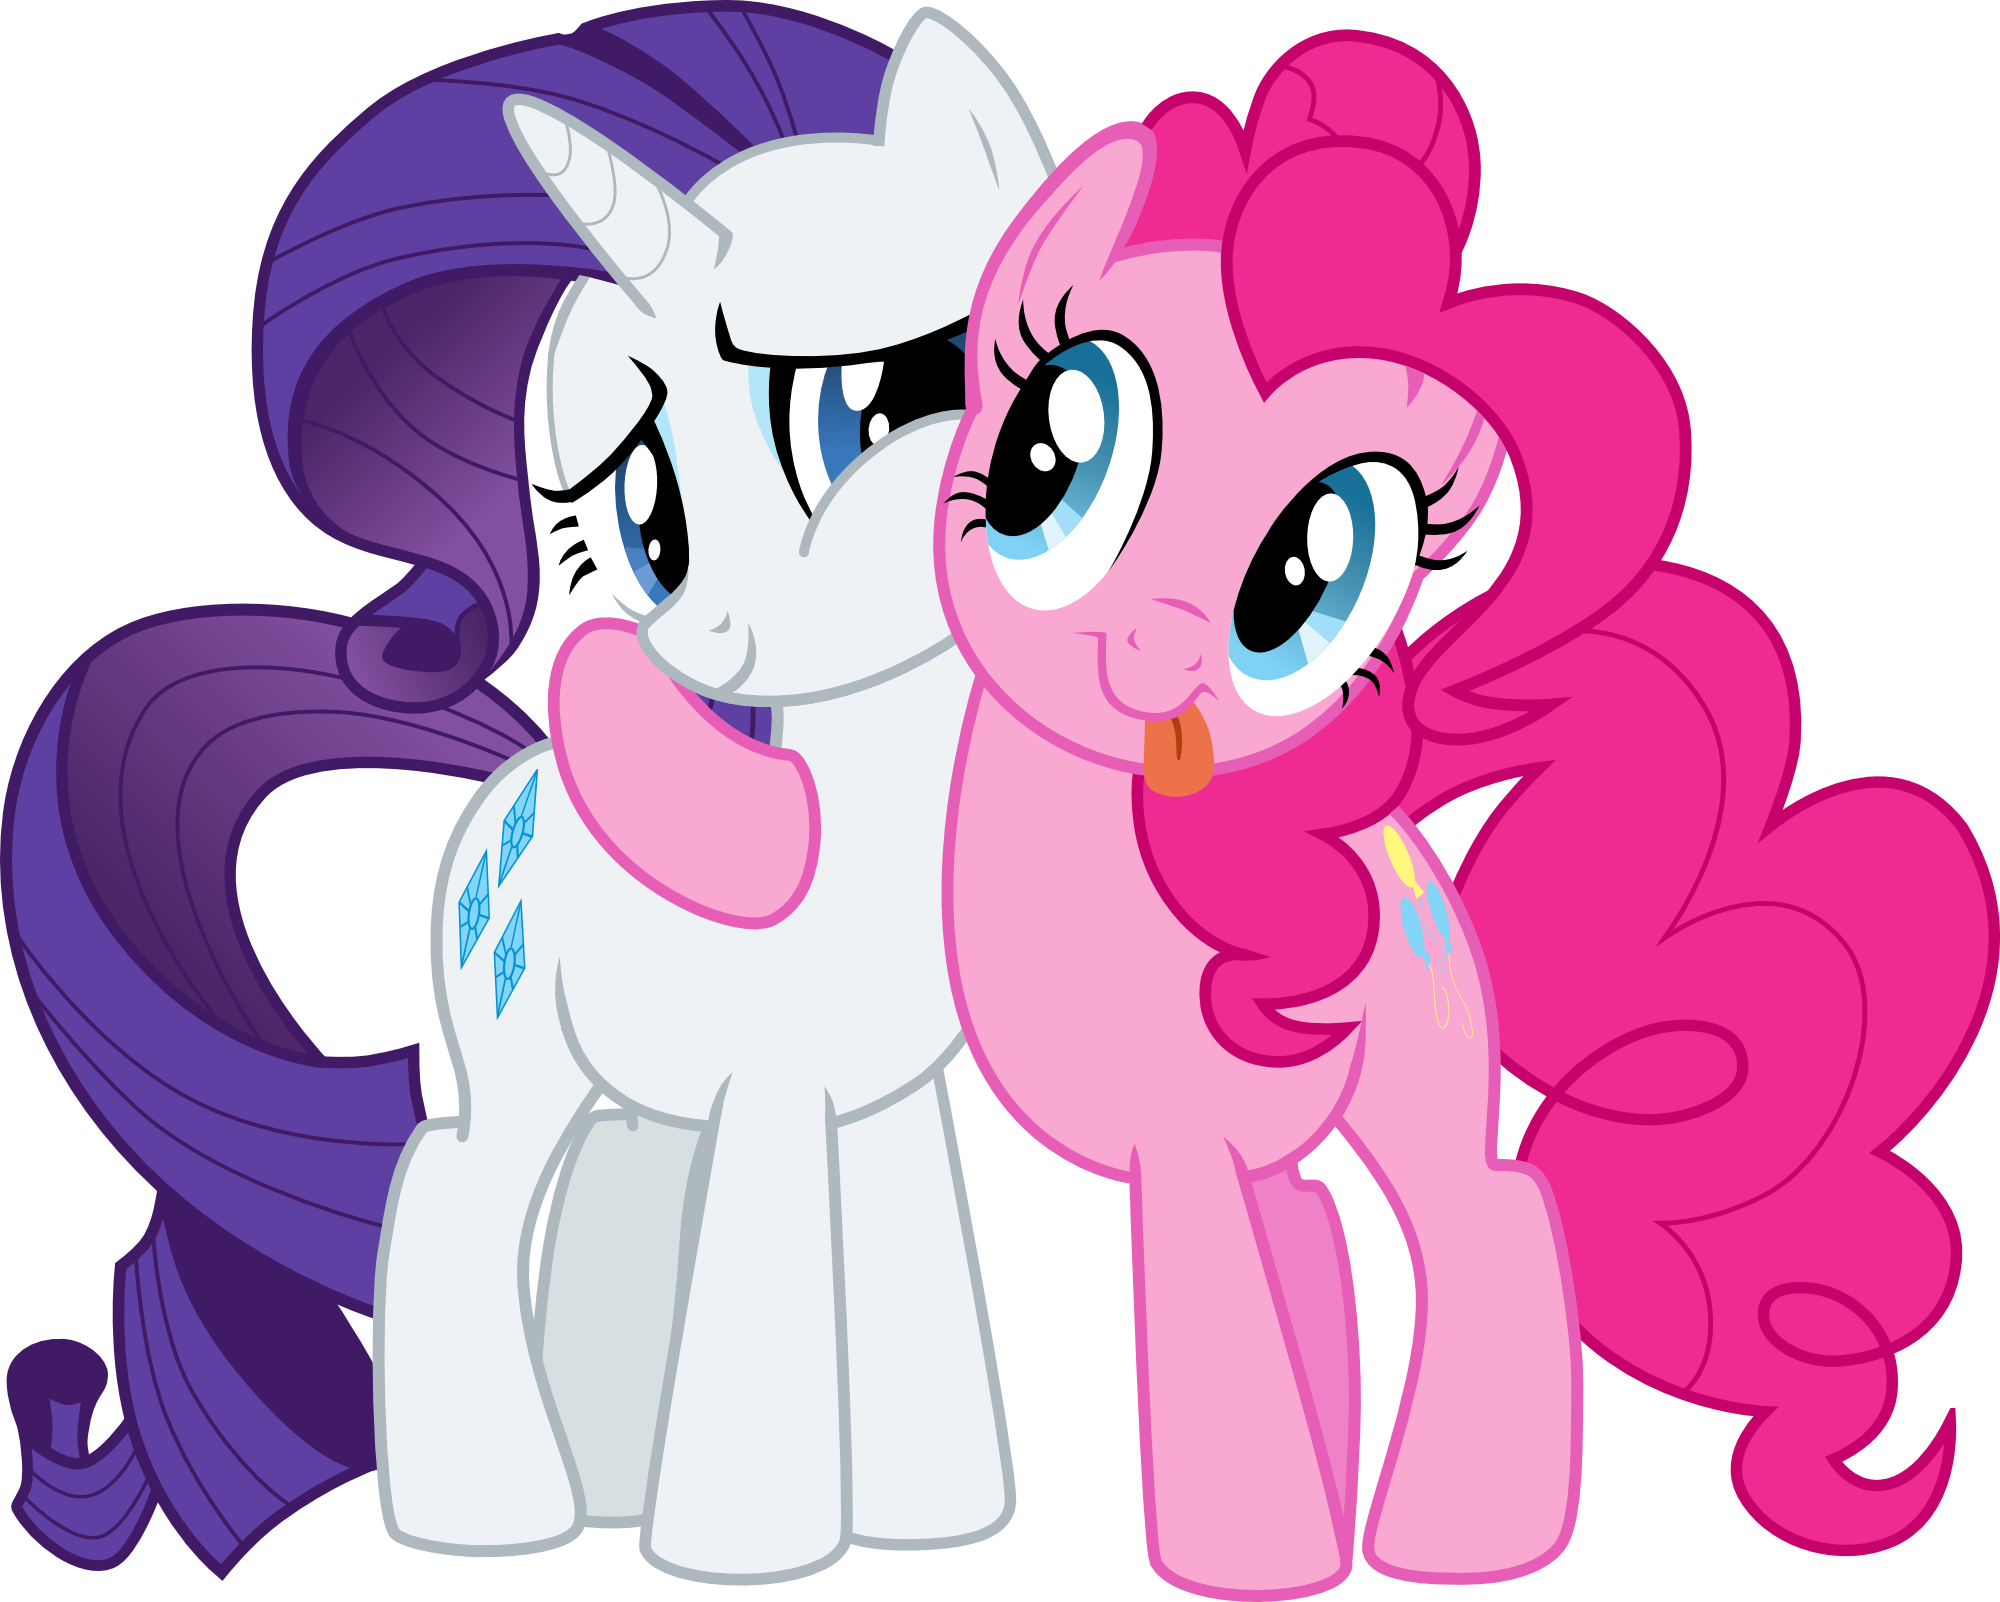 rarity_and_pinkie_pie_by_zeflootershy-d4